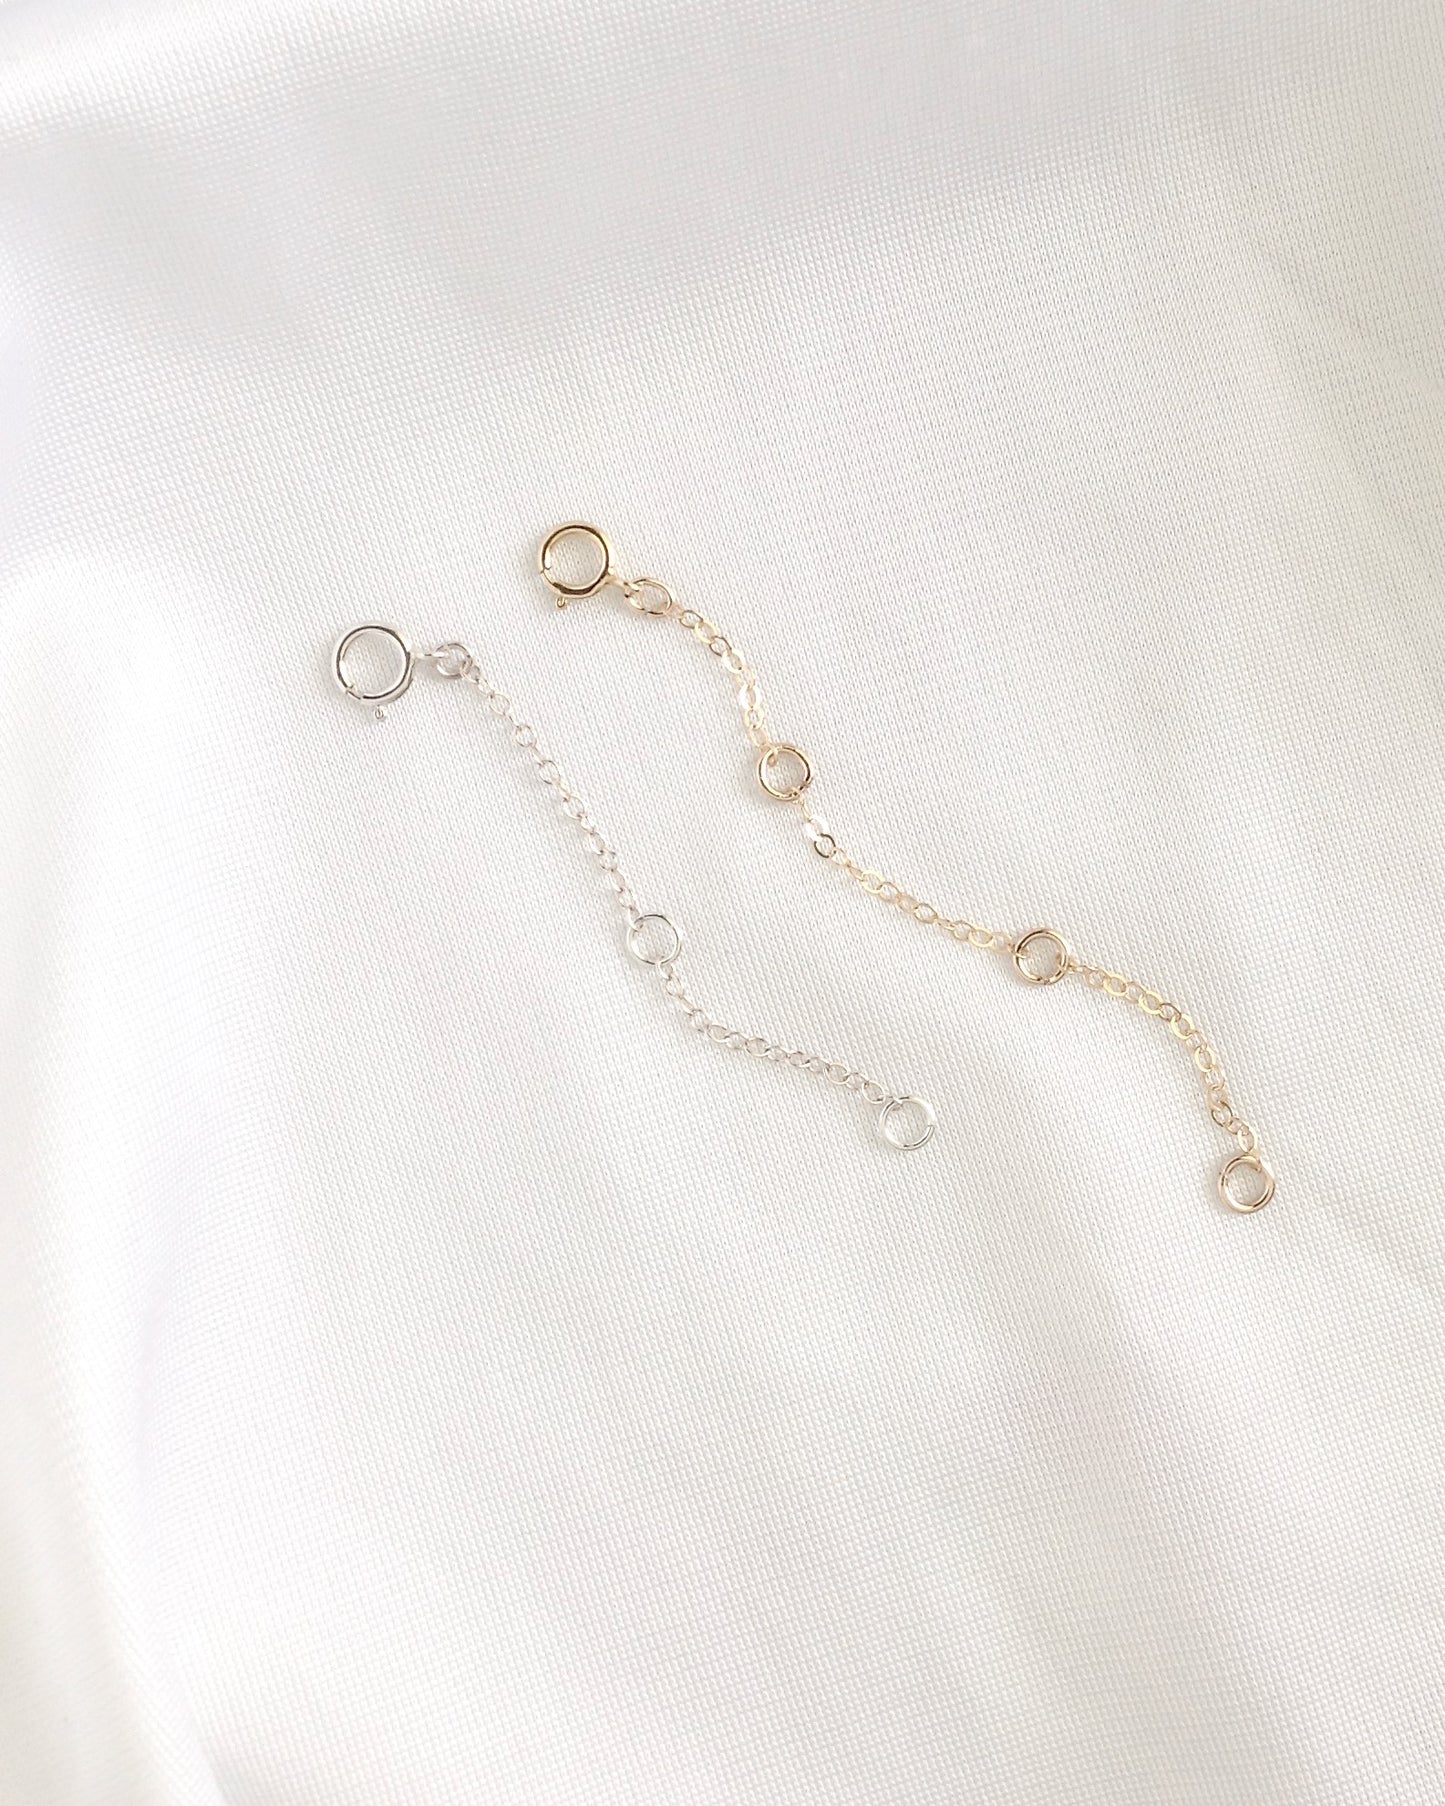 Adjustable Necklace Chain Extender in Gold Filled or Sterling Silver | IB Jewelry